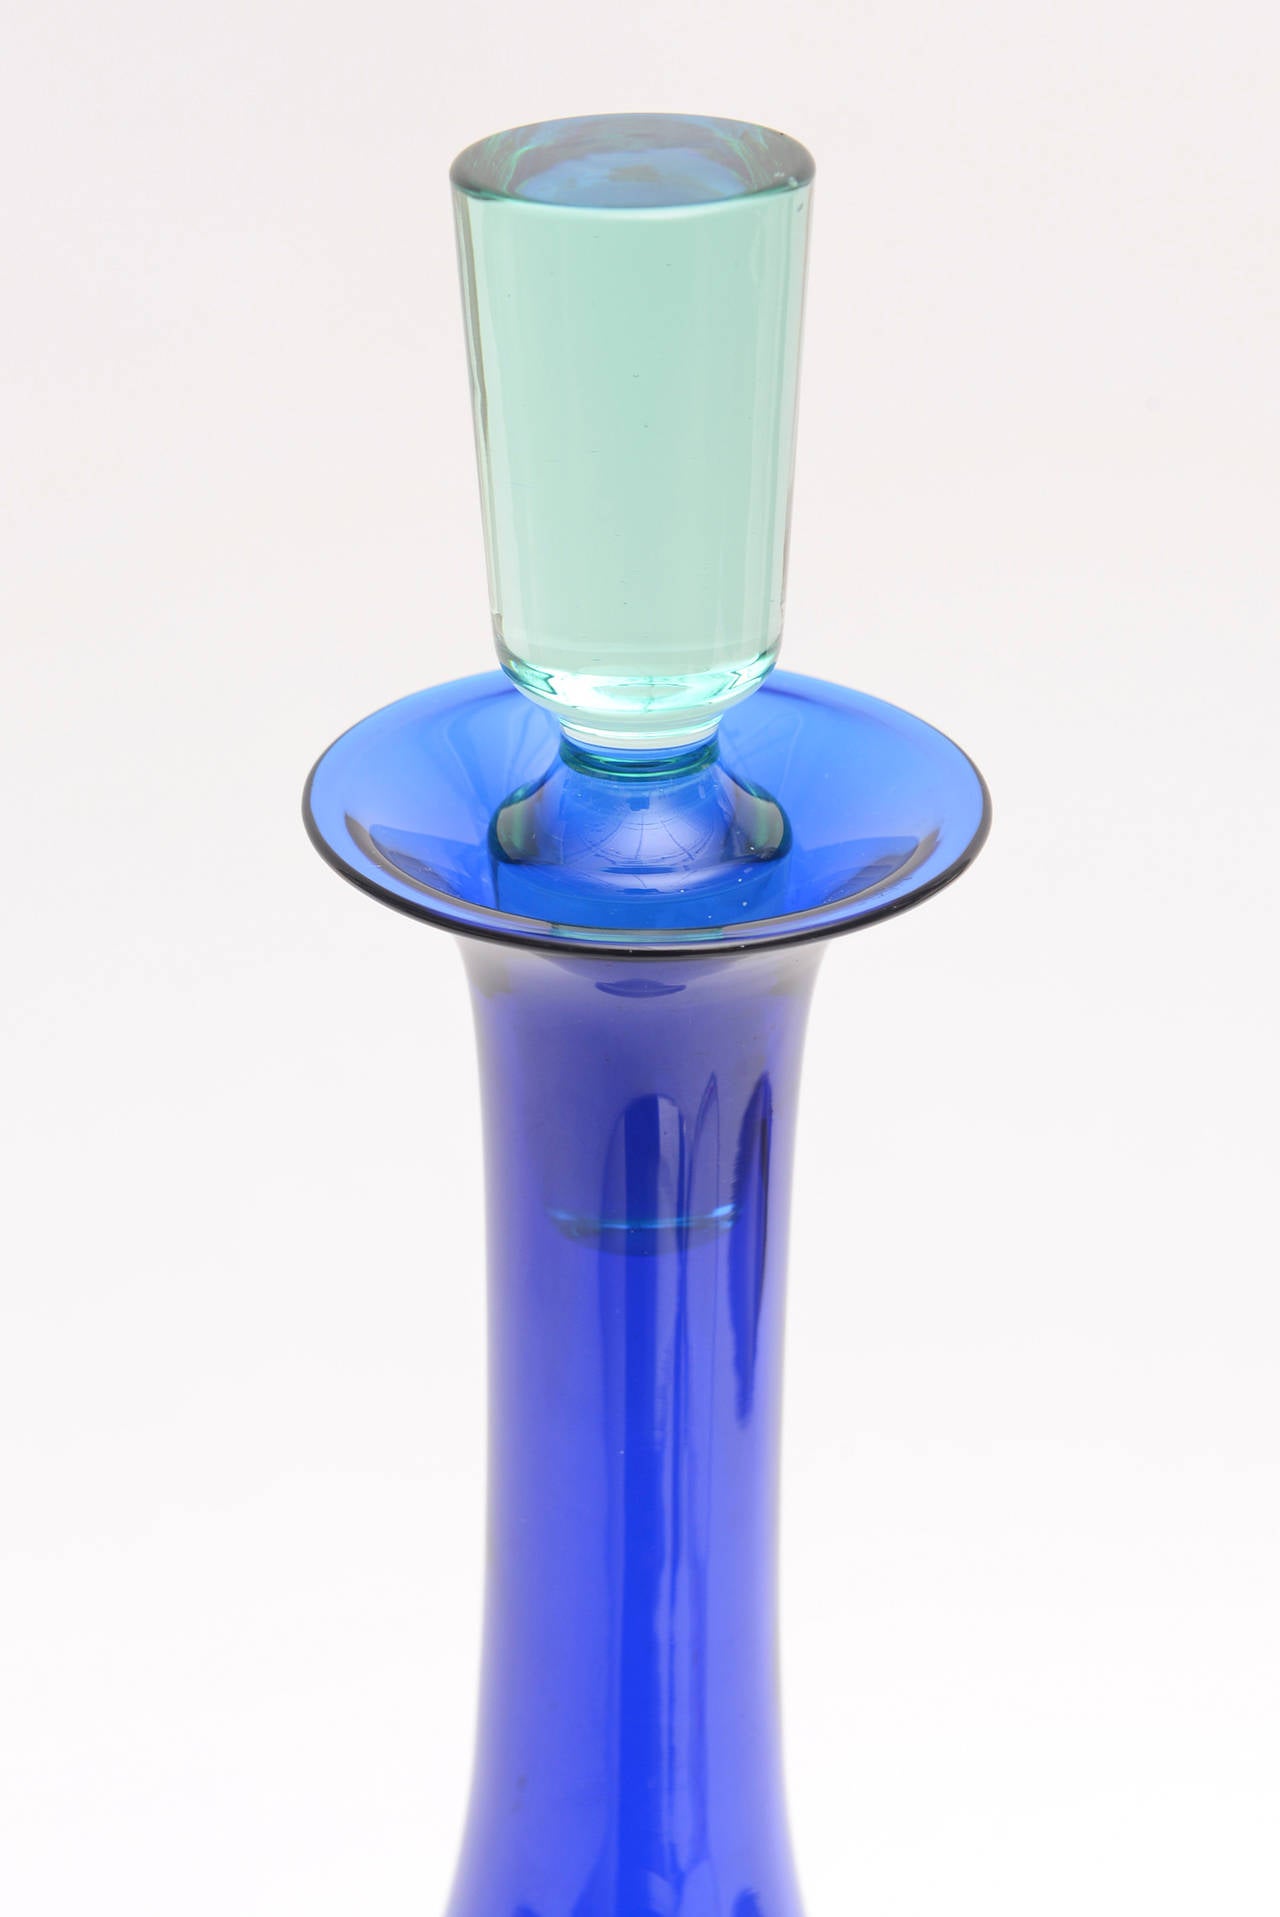 This danish gorgeous glass bottle/decanter/object has rich arresting colors that are layered and sommerso. it is by Anje Kjaer for Holmegaard/Royal Copenhagen
Royal blue fades to darker midnight blue/black to sea blue green...
The original stopper